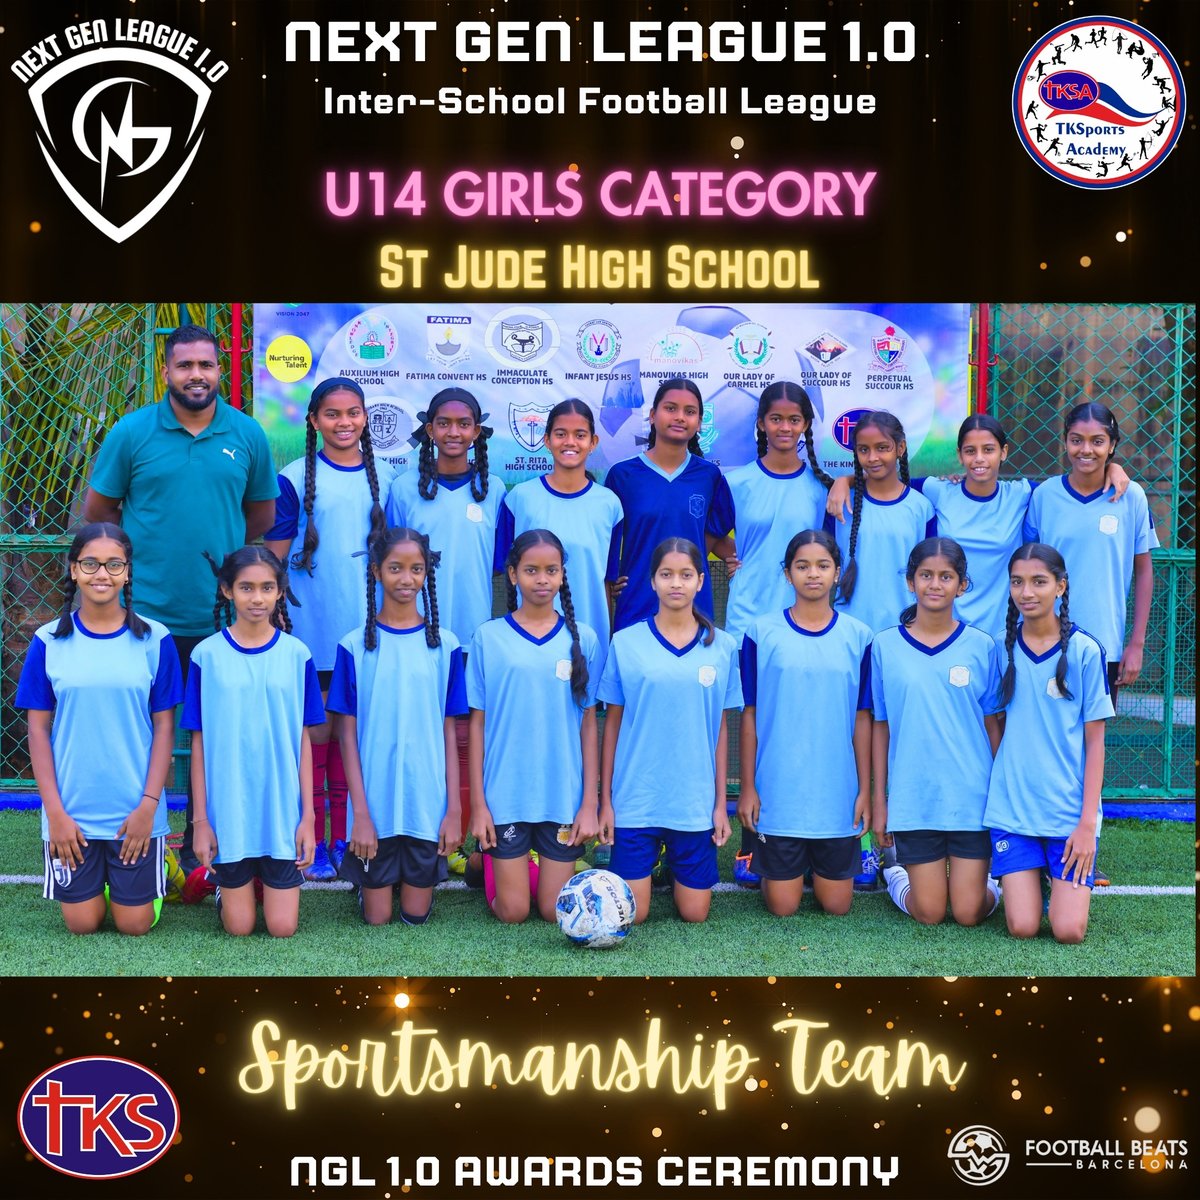 Next Gen League (NGL) 1.0 Awards Ceremony, recognized teams and individuals fostering sportsmanship and demonstrating remarkable improvement.

Sportsmanship Team Awards:
U12 – Our Lady of Succour
U14 Boys – St Xaviers High School
U14 Girls – St Jude High School

#nglgoa #tksagoa